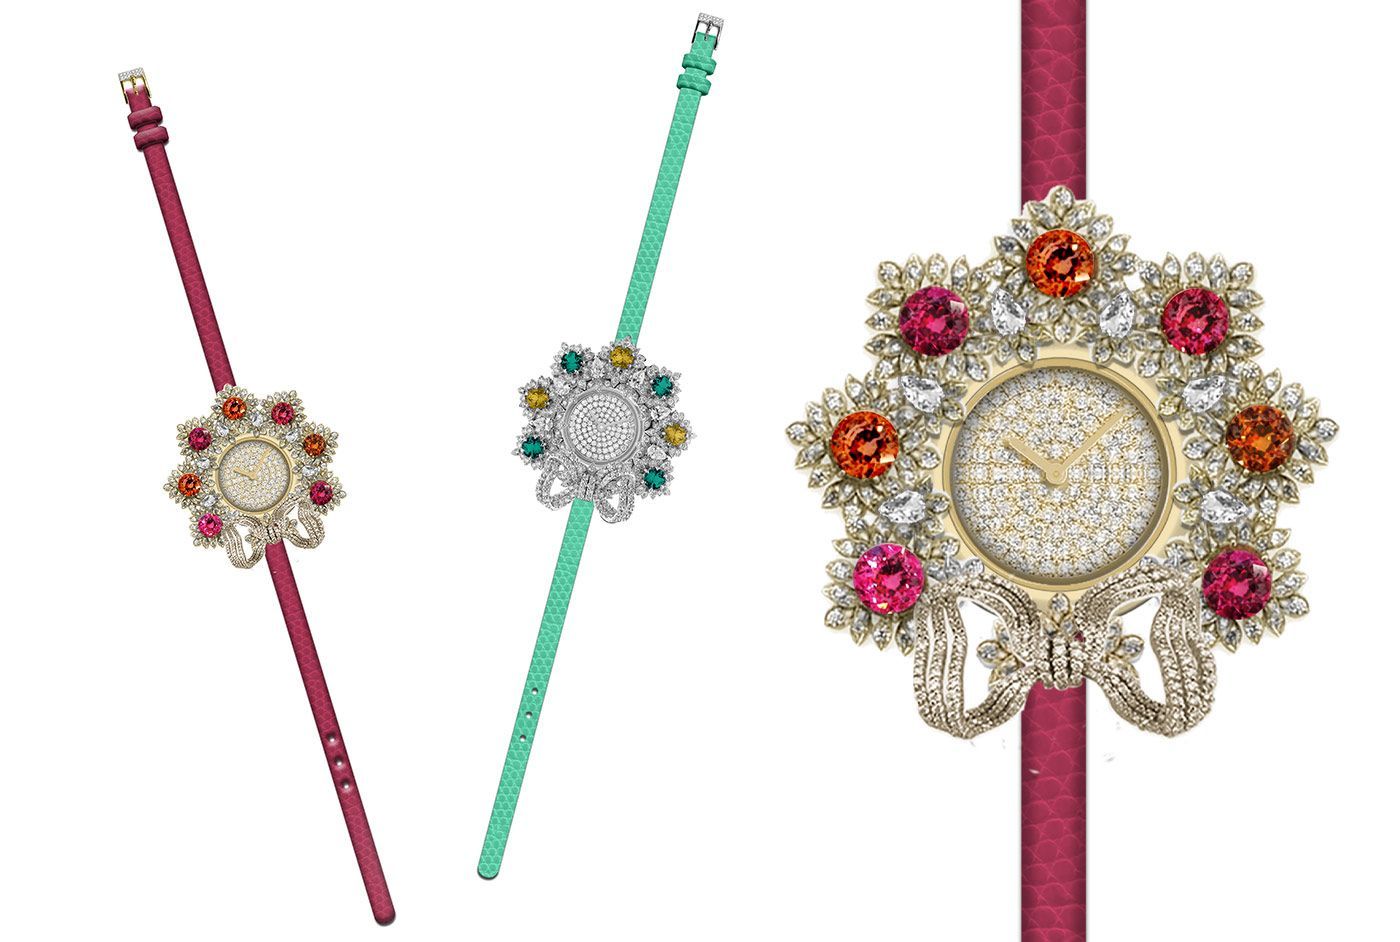 Gucci Allegoria High Jewellery watches in gold, white gold, multicoloured gemstones and diamonds 